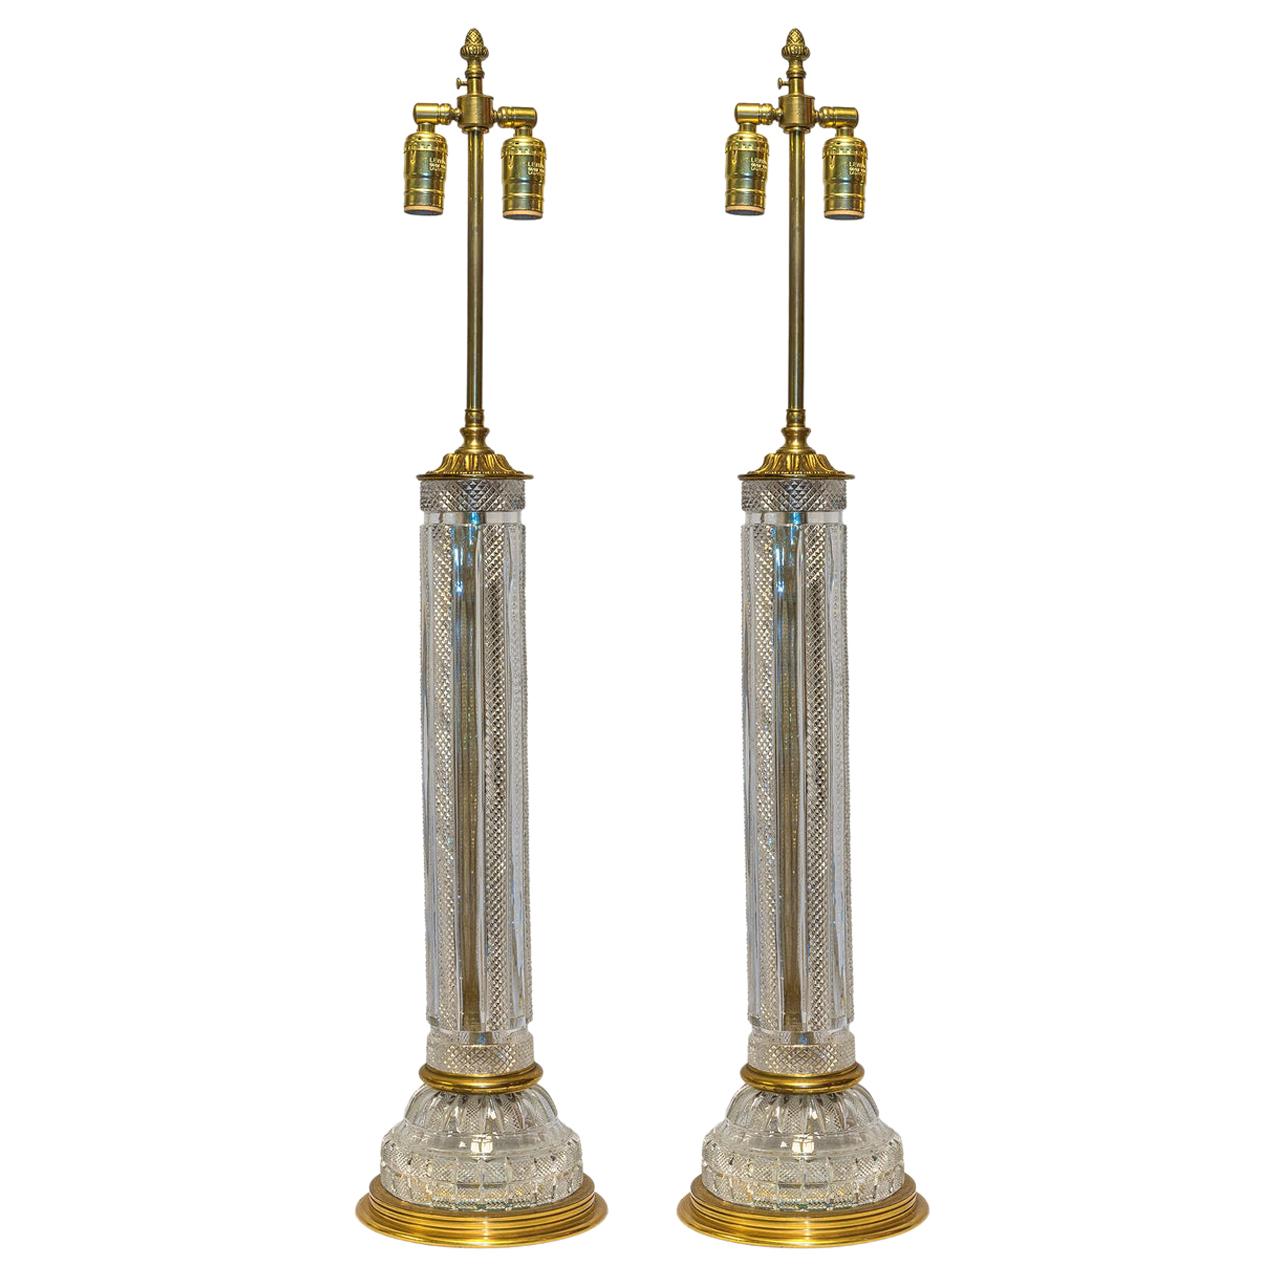 A Fine Pair of Large Cut Crystal Table Lamp